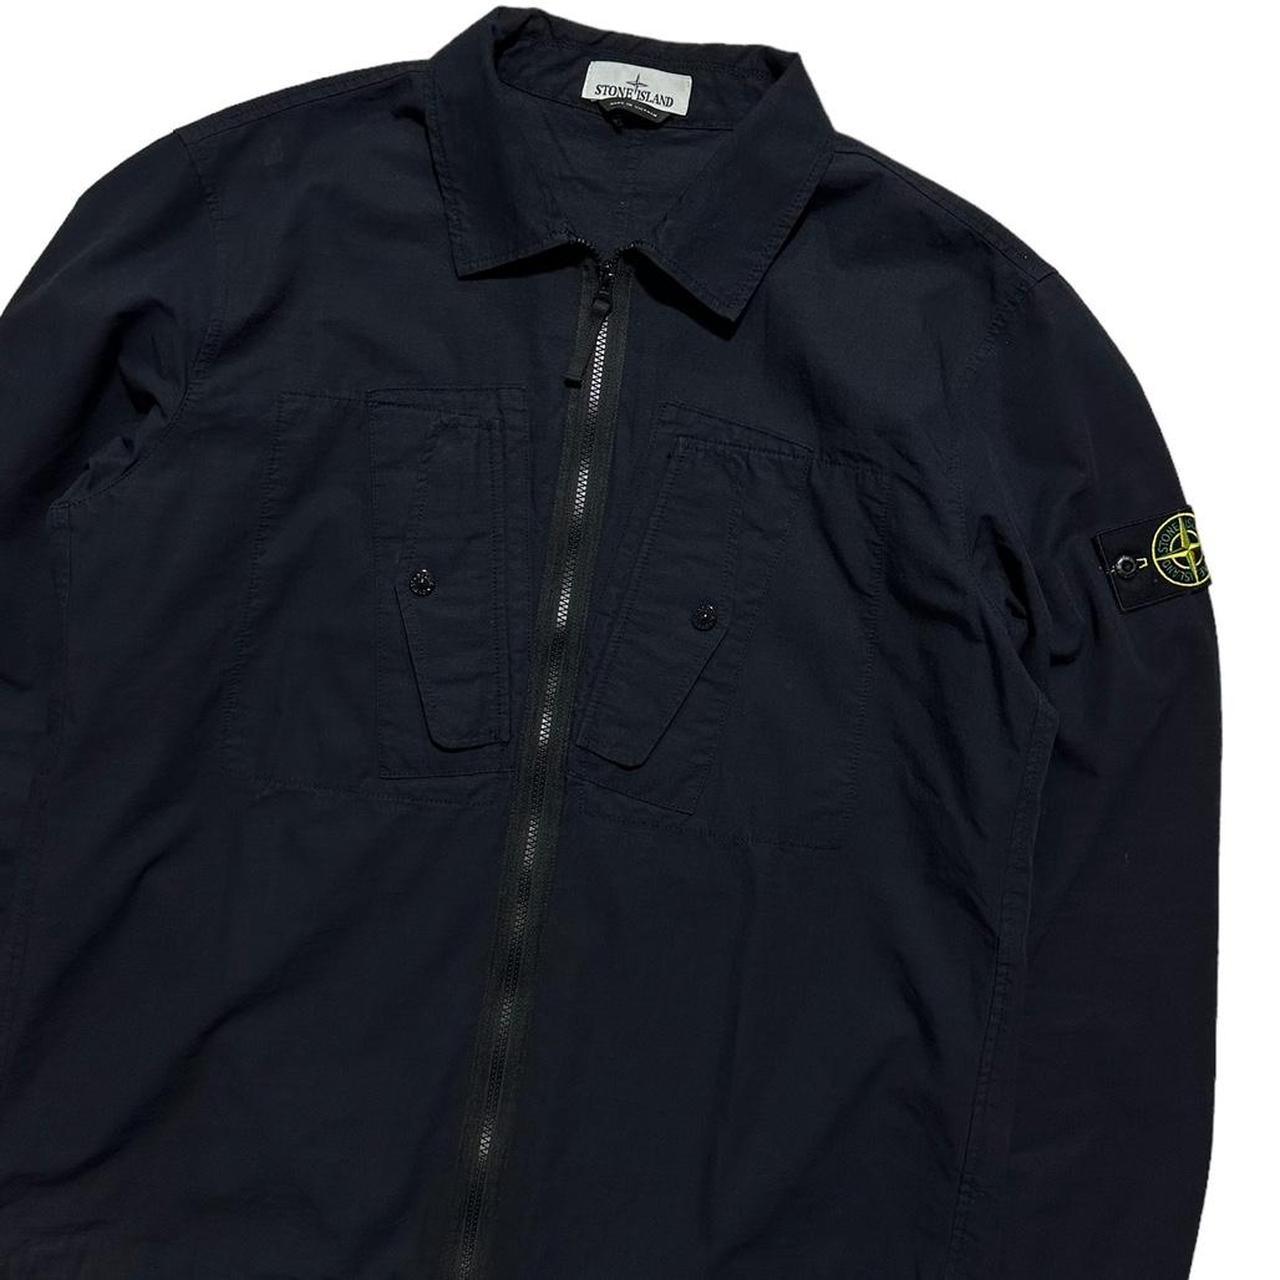 Stone Island Navy Double Pocket Overshirt - Known Source